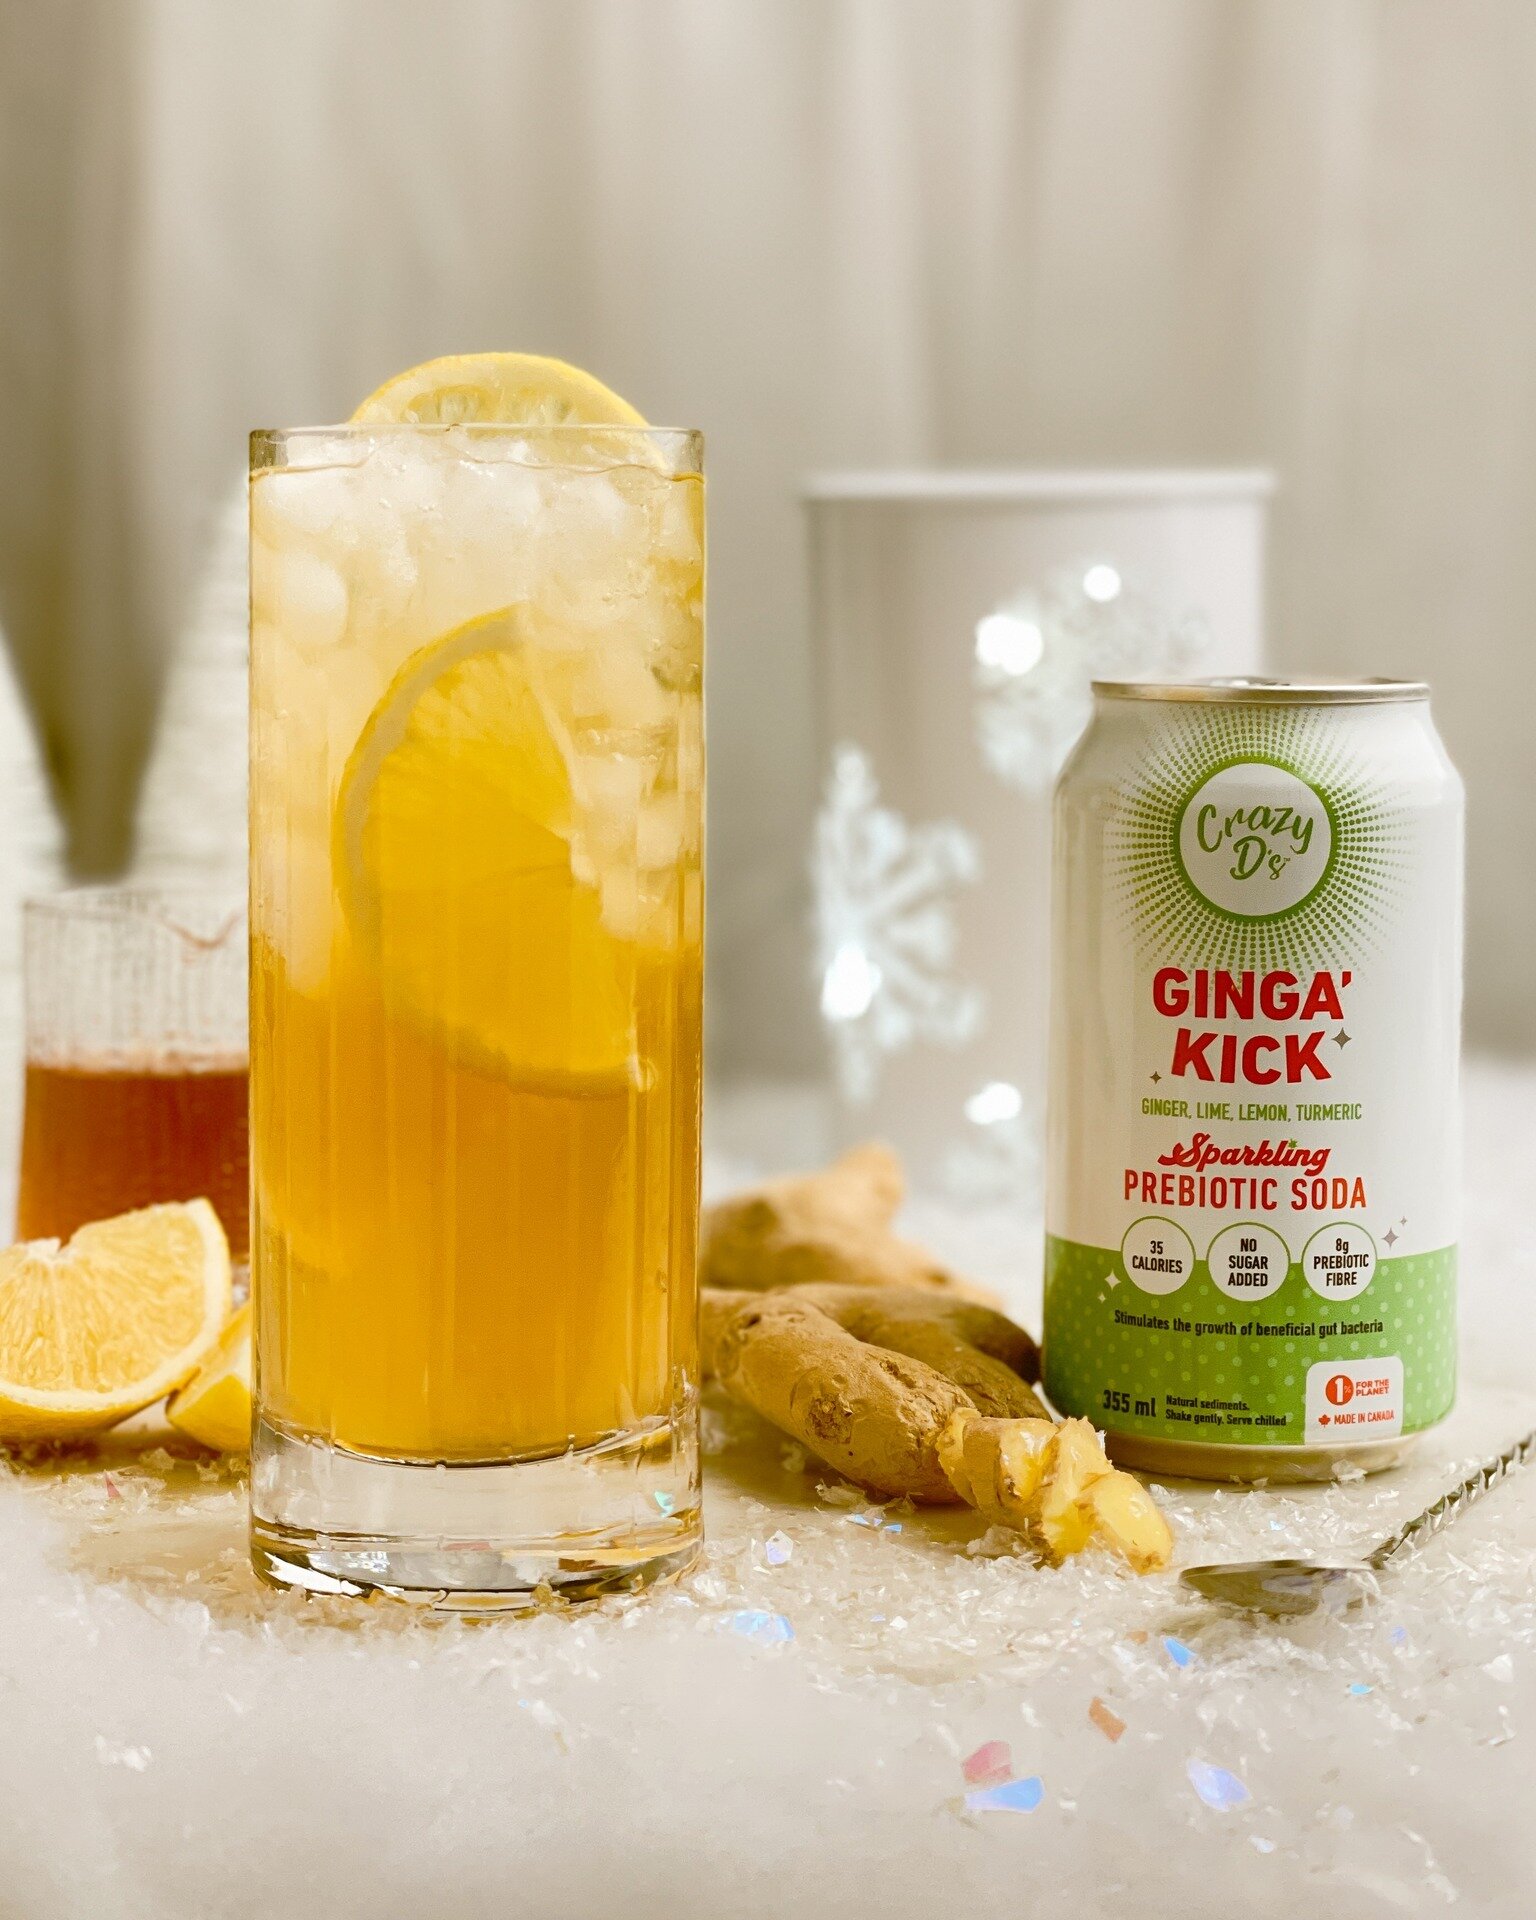 Switchel it up with Sarah's switchel recipe featuring Crazy D's Ginga Kick soda. This healthy-ish mocktail contains real ginger and prebiotics, as well as optional non-alcoholic bourbon for a grown-up twist! Get the recipe at our Dry January resource